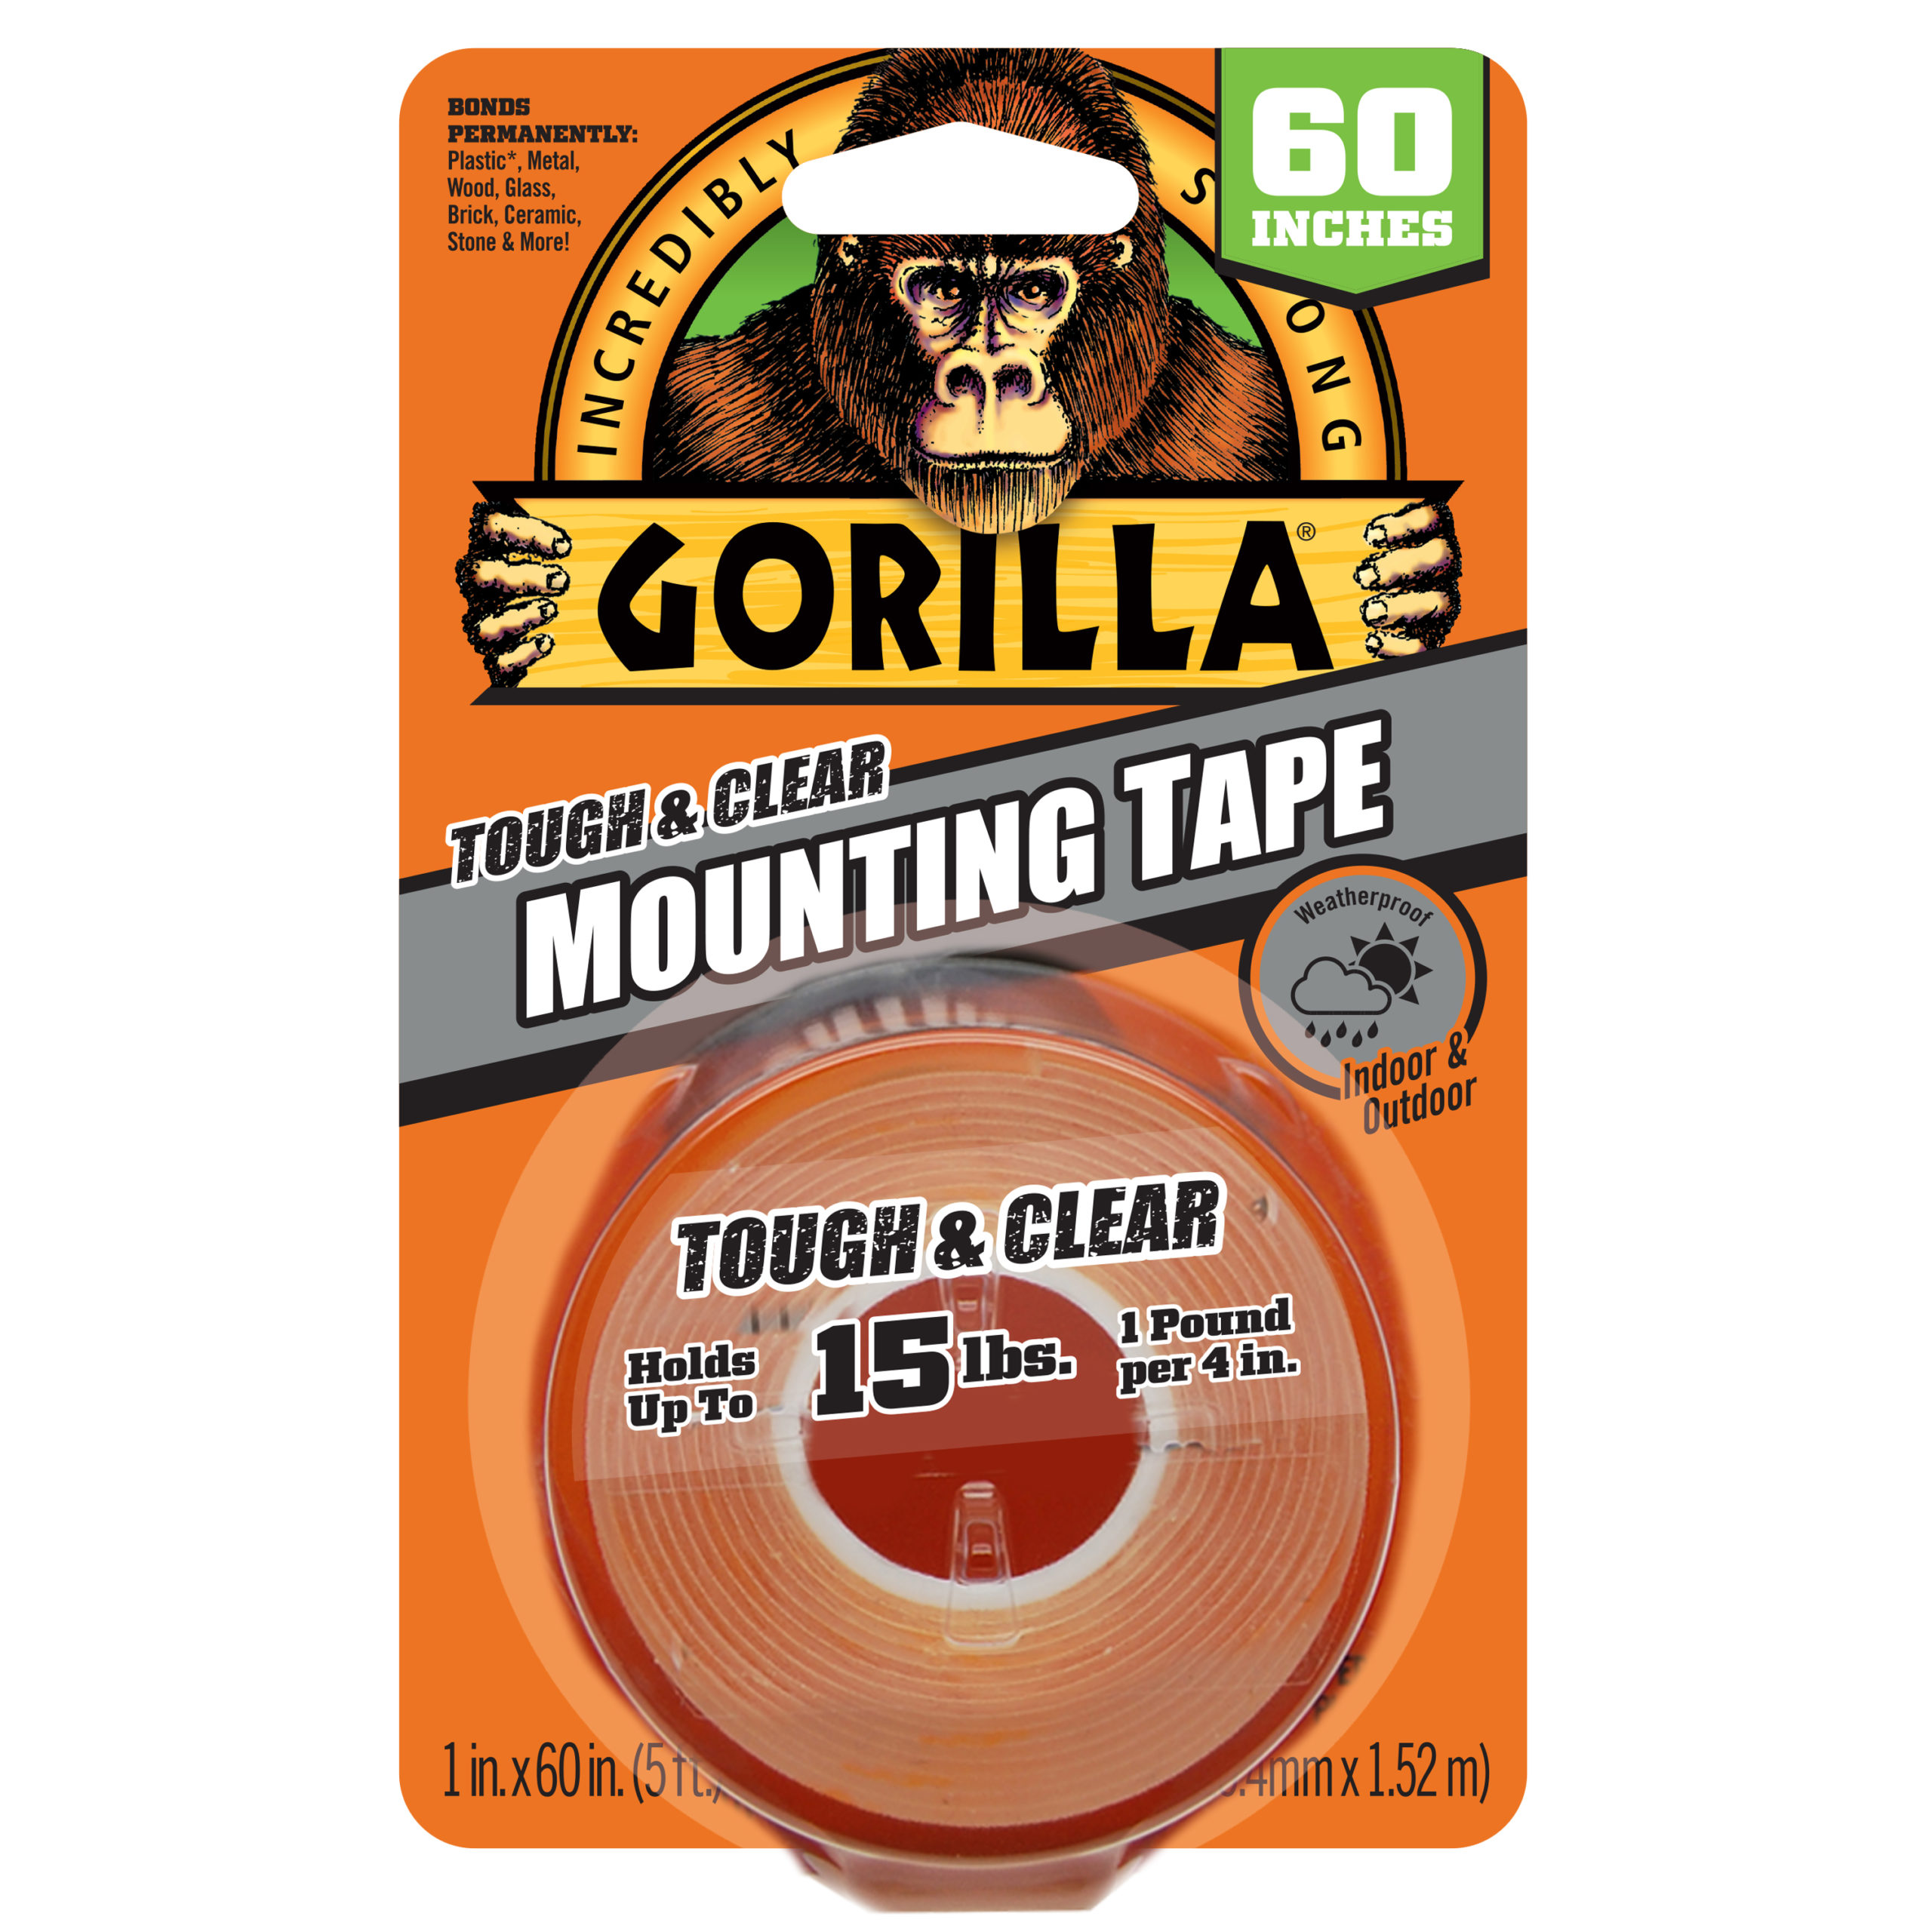 Gorilla Mounting Tape 6055001 HEAVY DUTY Holds Up to 30LB 6 PACK! 